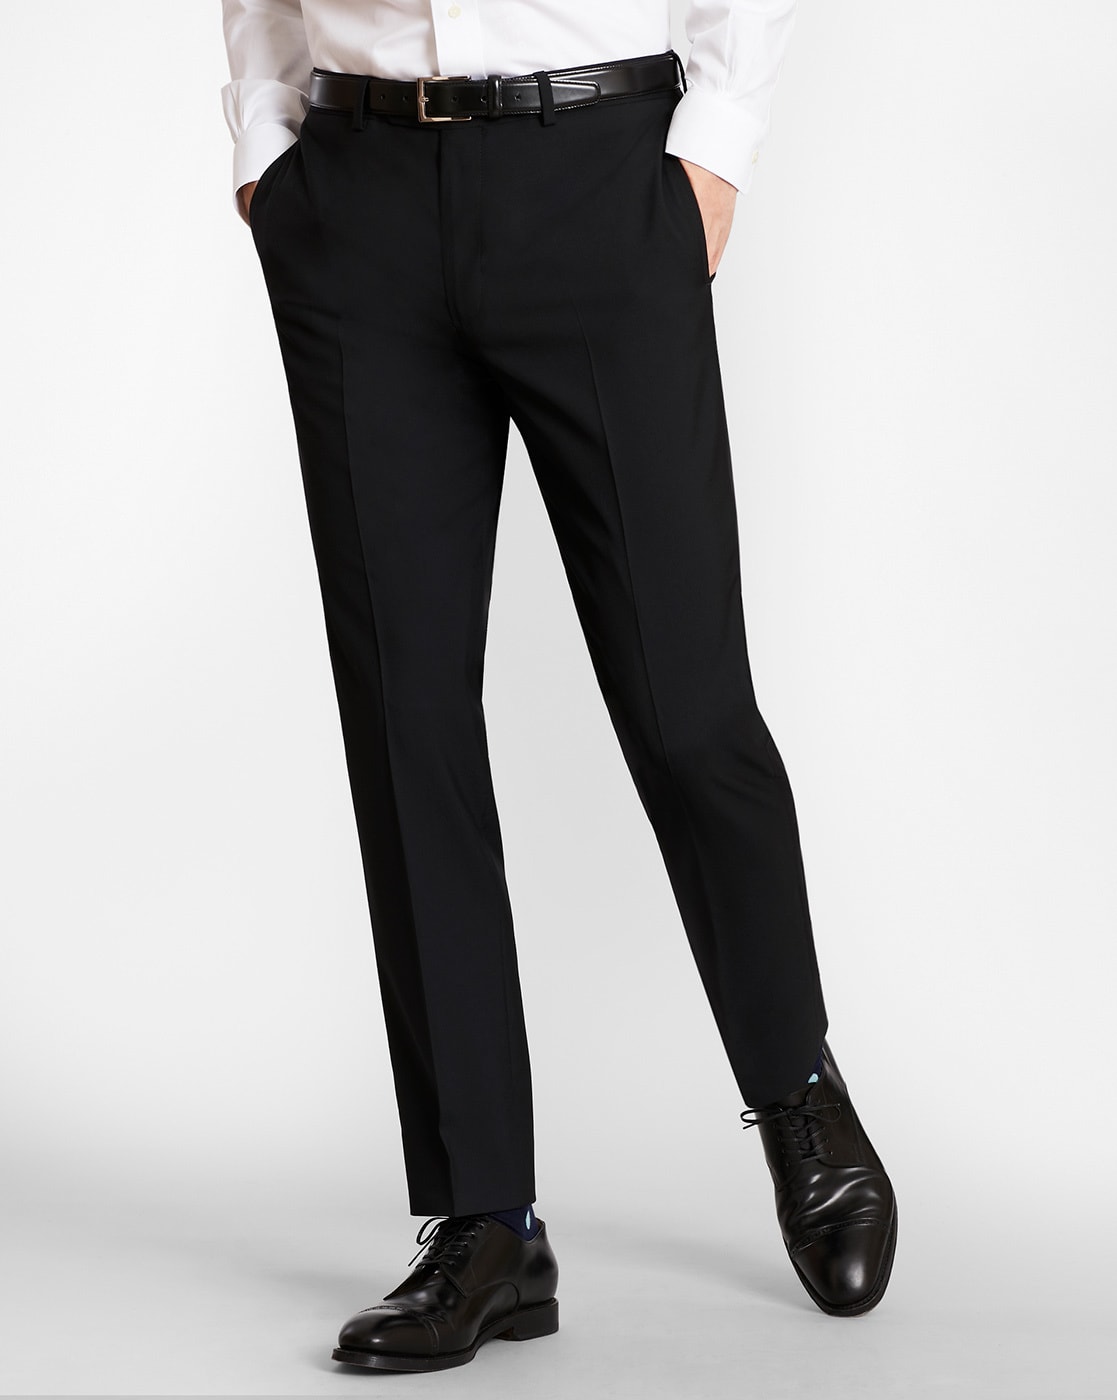 Buy Black Trousers & Pants for Men by The Indian Garage Co Online | Ajio.com-saigonsouth.com.vn